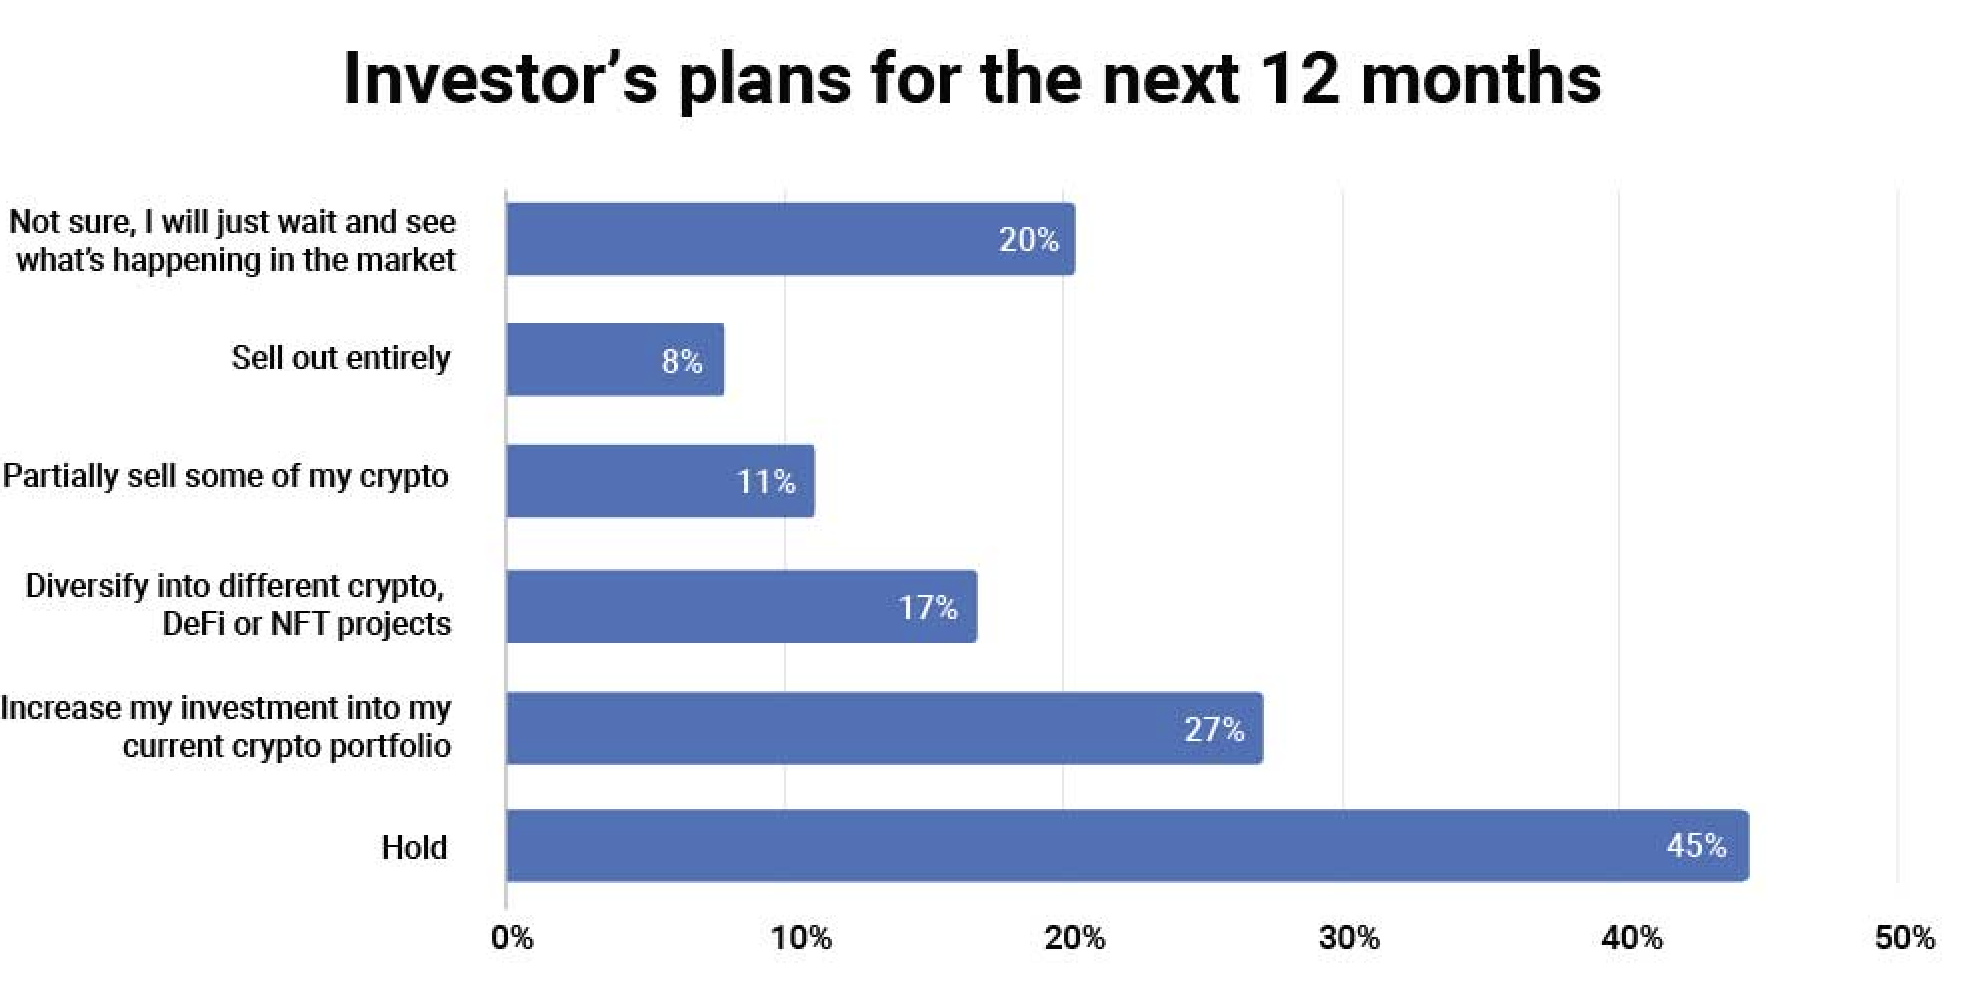 Investor's Plans for the Next 12 Months